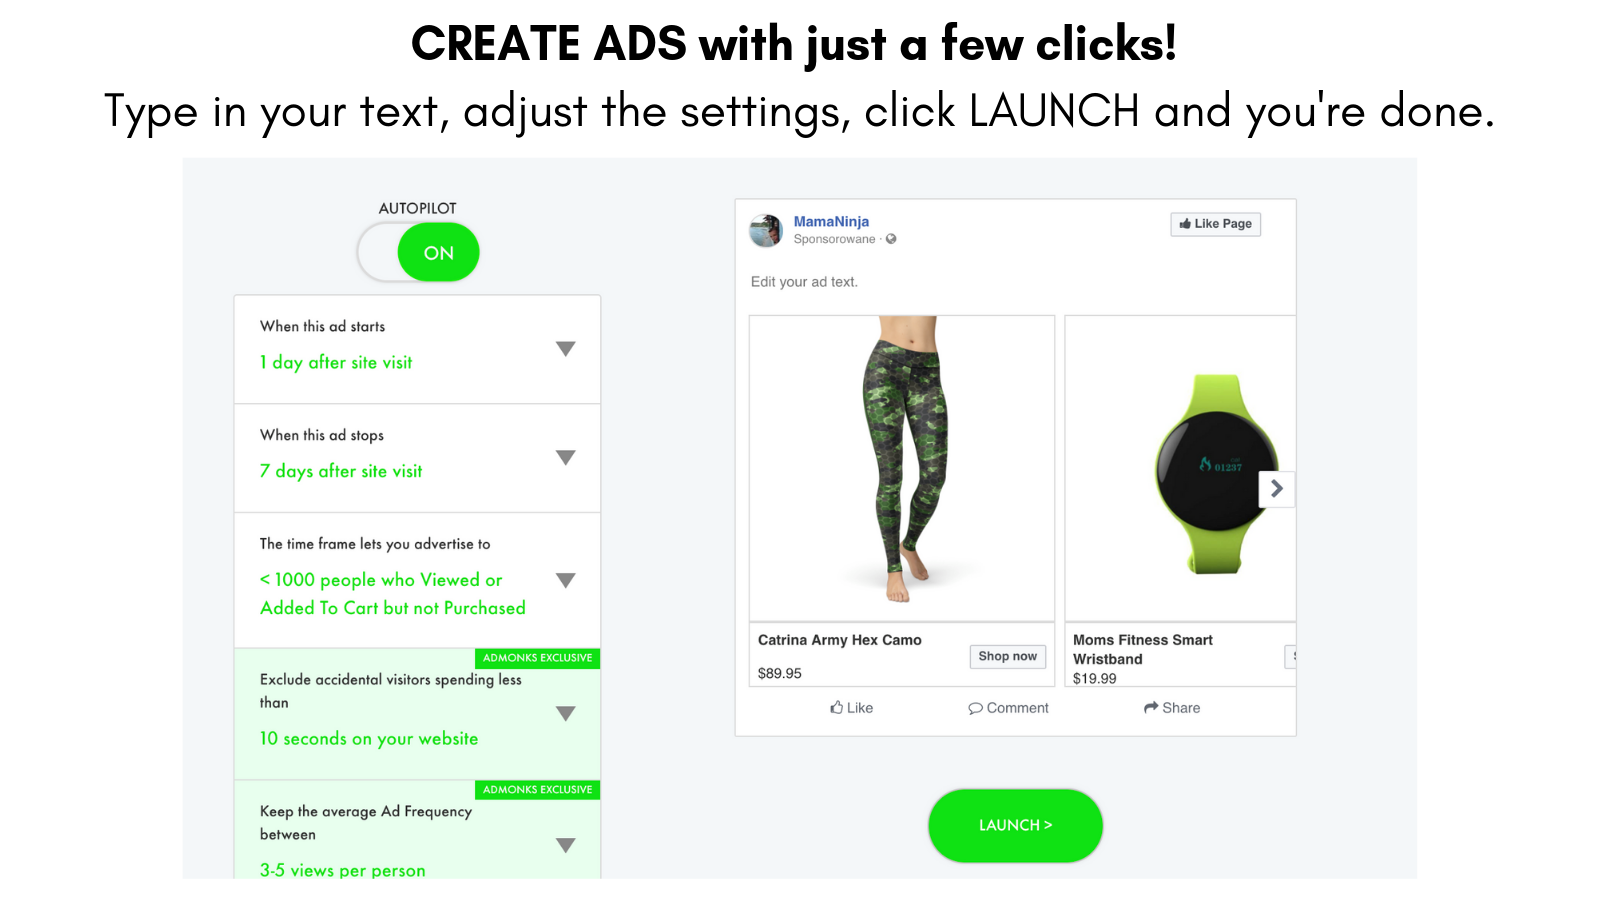 Creating Ads with just a few clicks